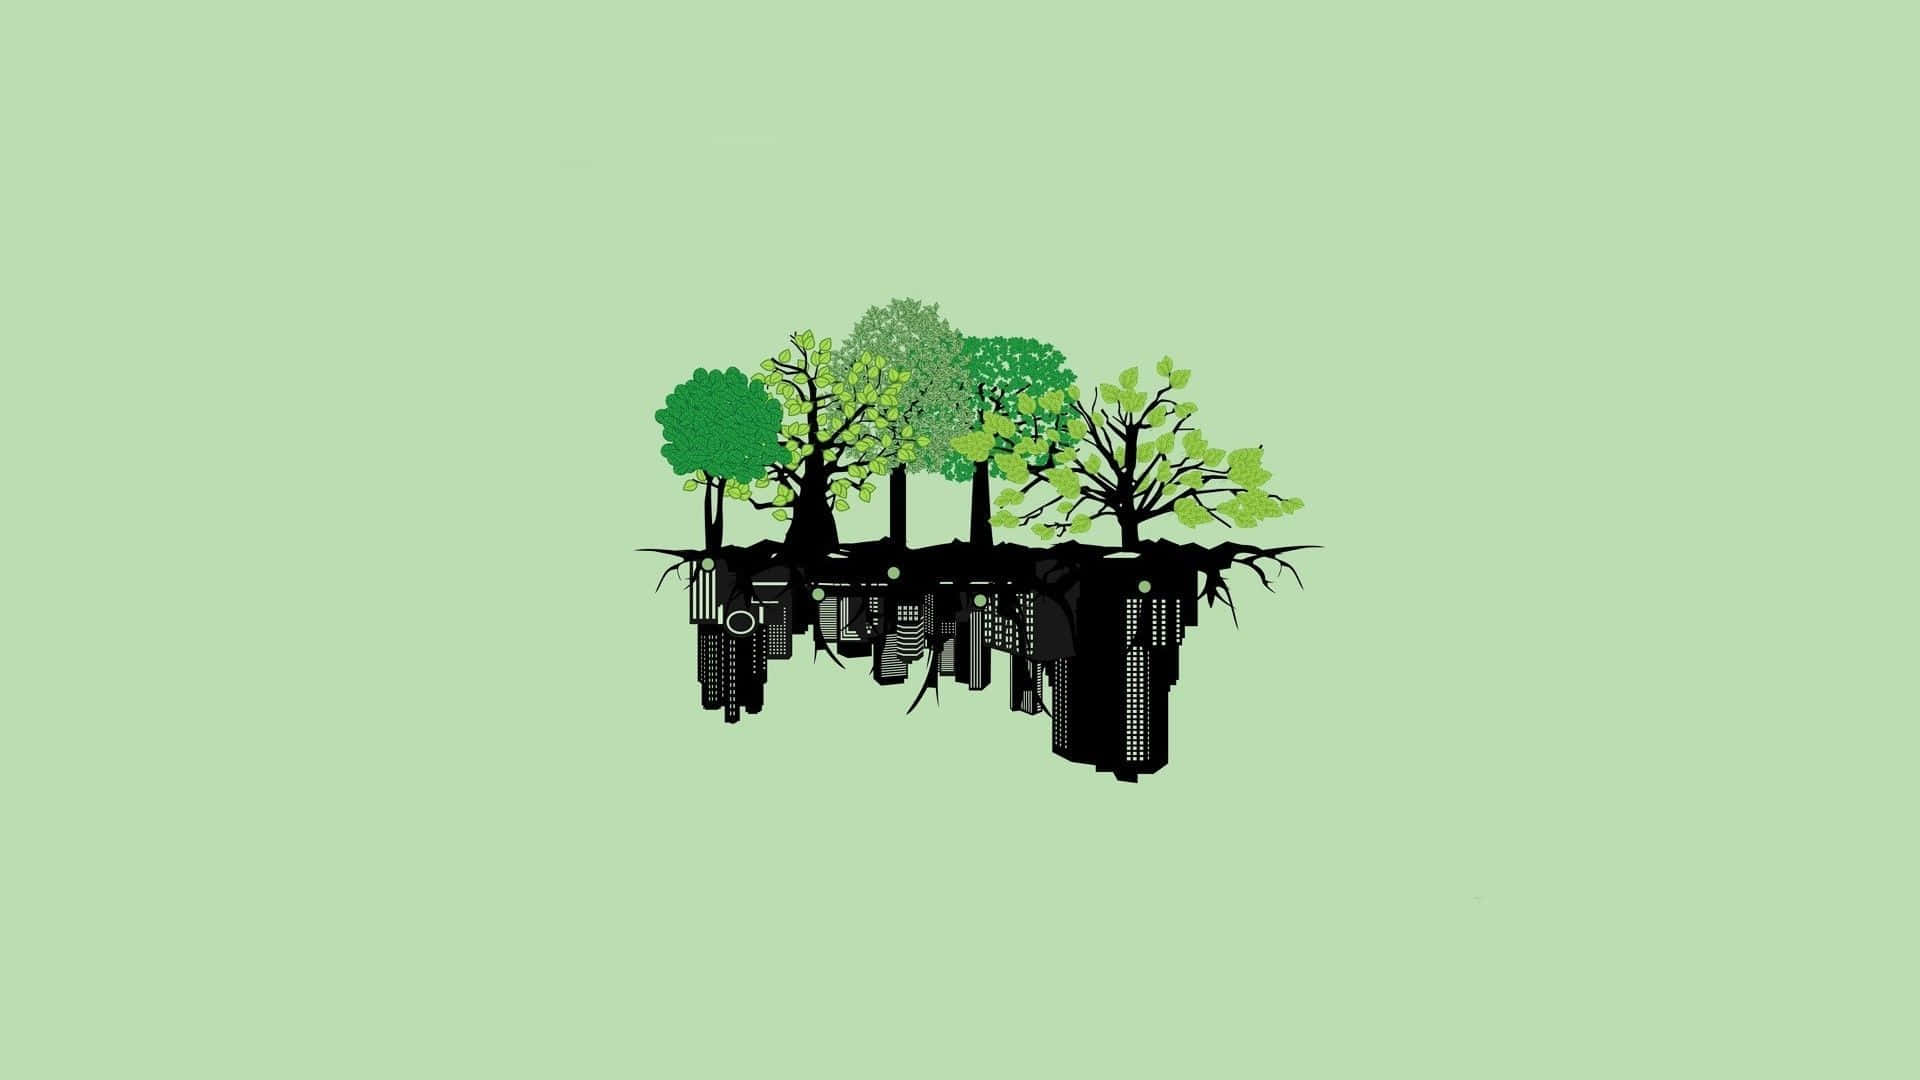 Download Aesthetic Green Minimal Trees With Inverted Buildings Wallpaper |  